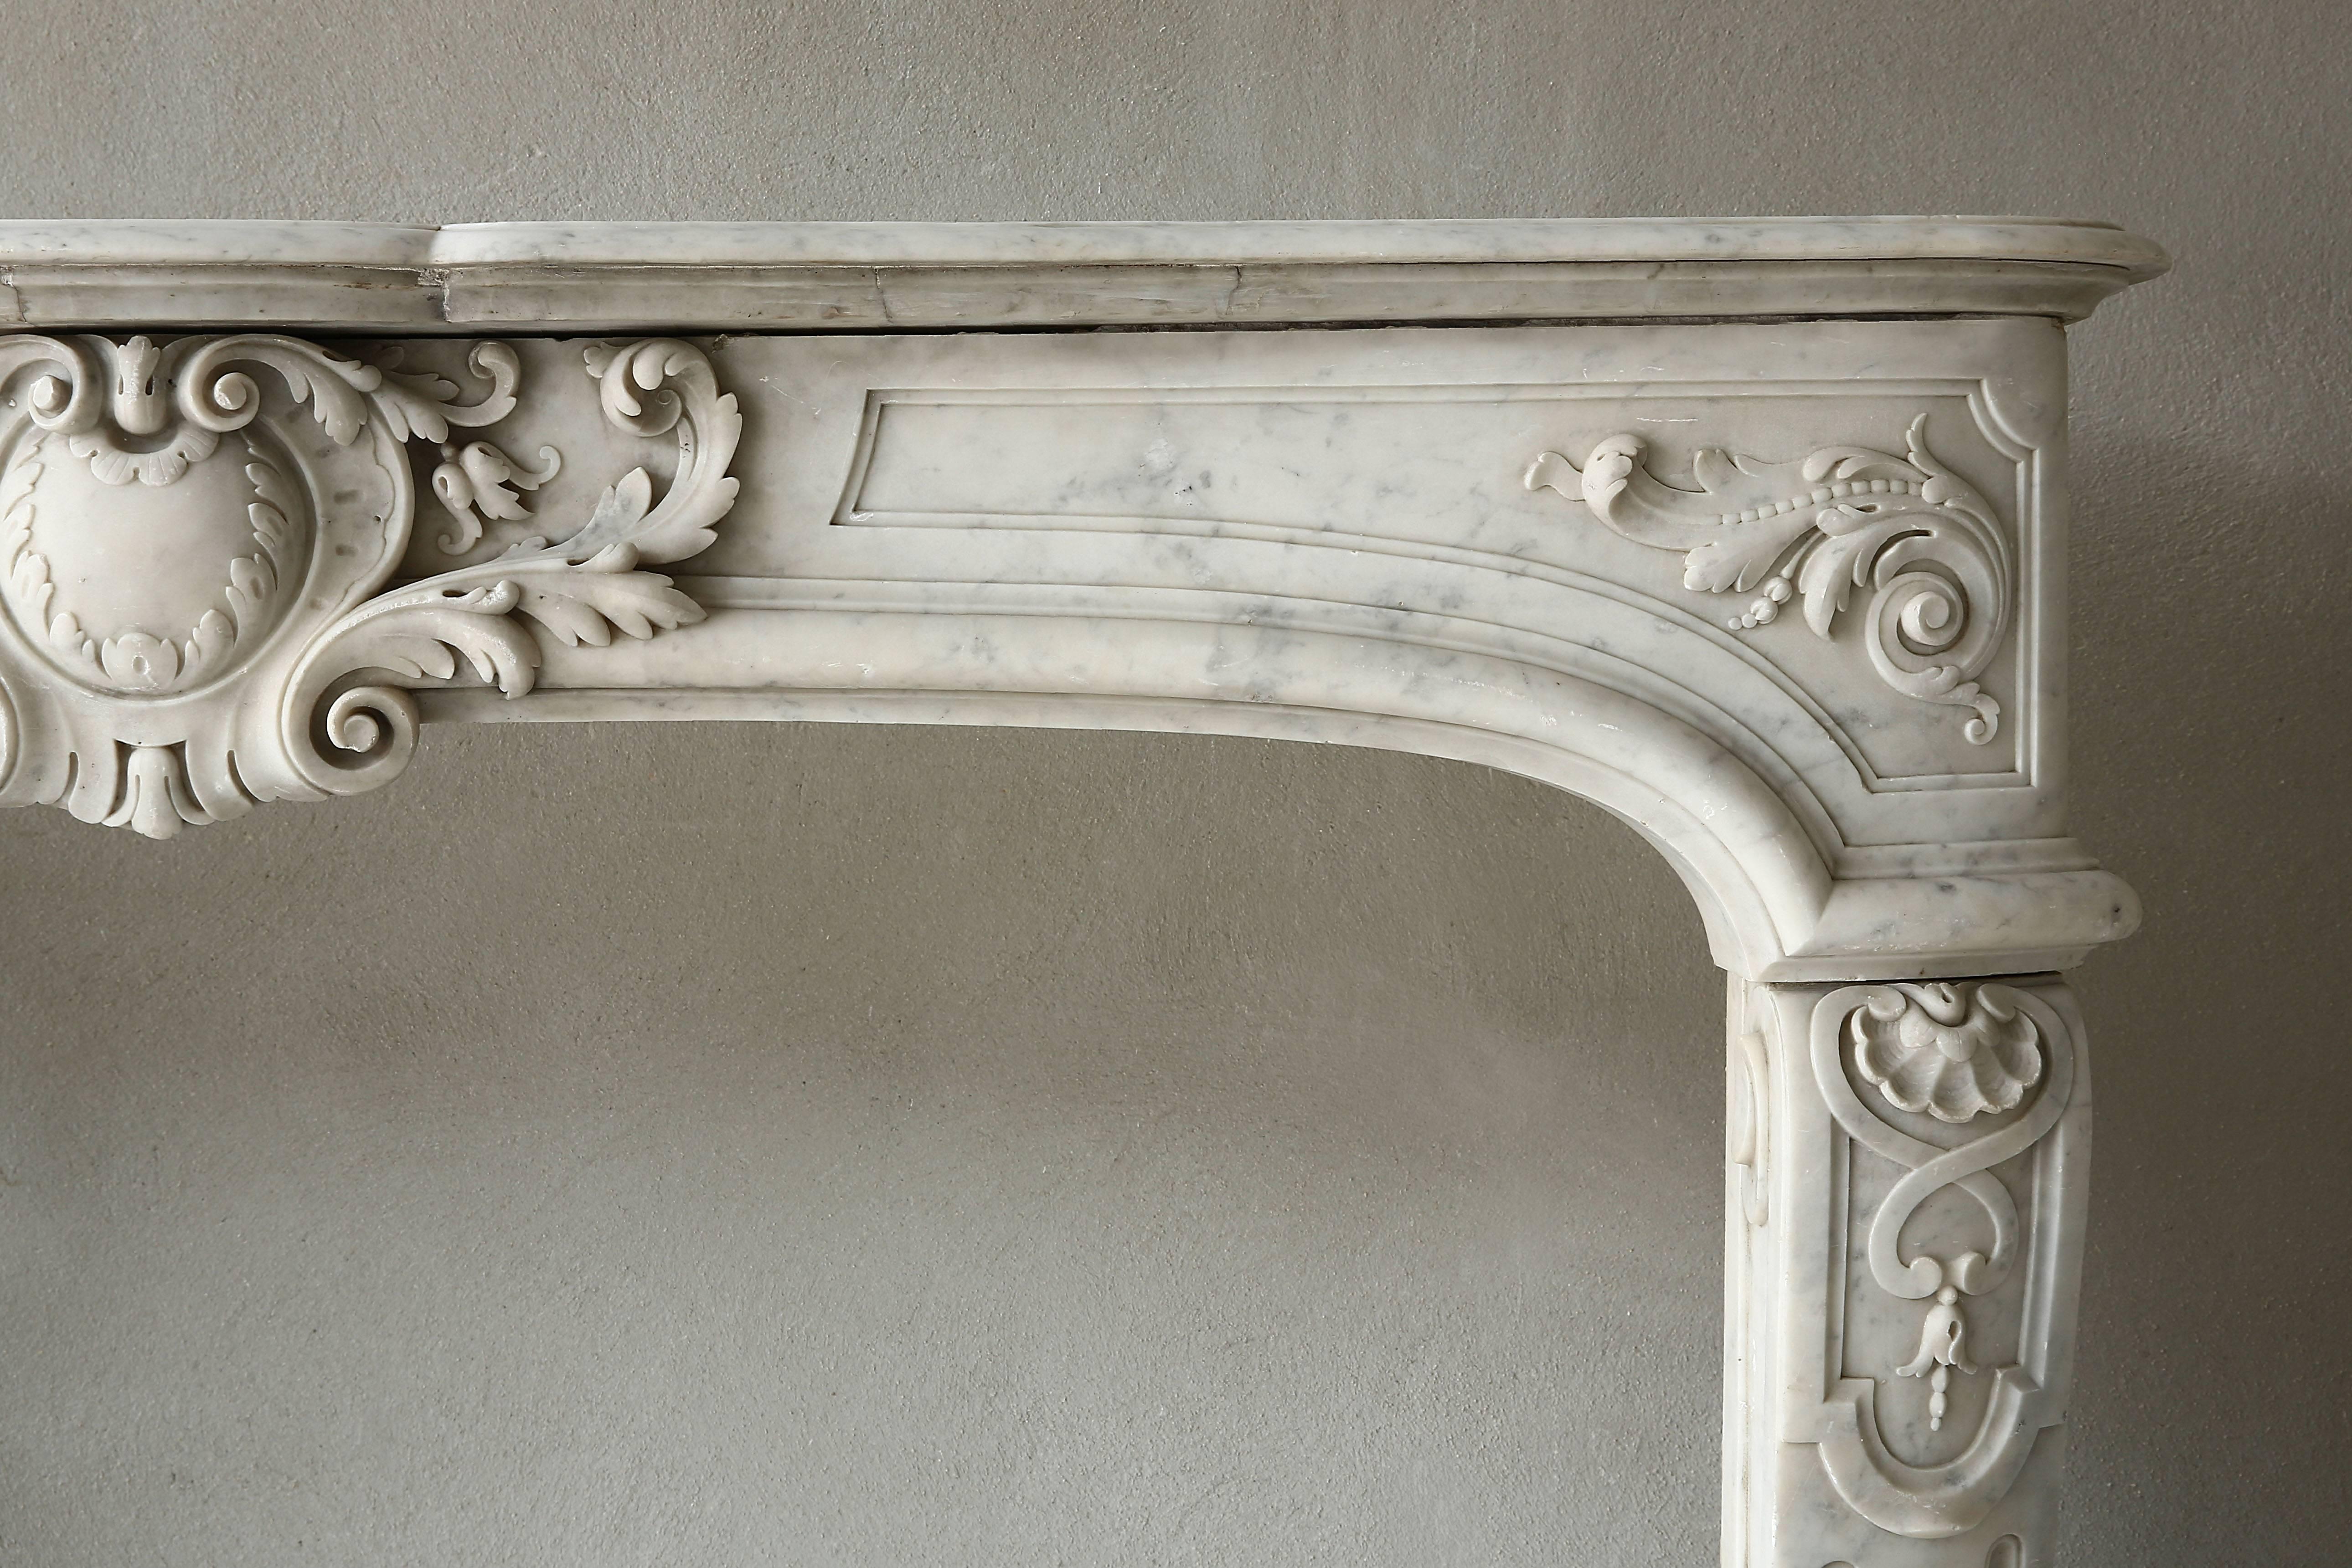 Very rare marble antique fireplace from the era of Louis XIV of white Carrara marble. This unique fireplace dates back to the 19th century. The curved legs are decorated with scallops and cannellures. The front part has a beautiful scallop in the